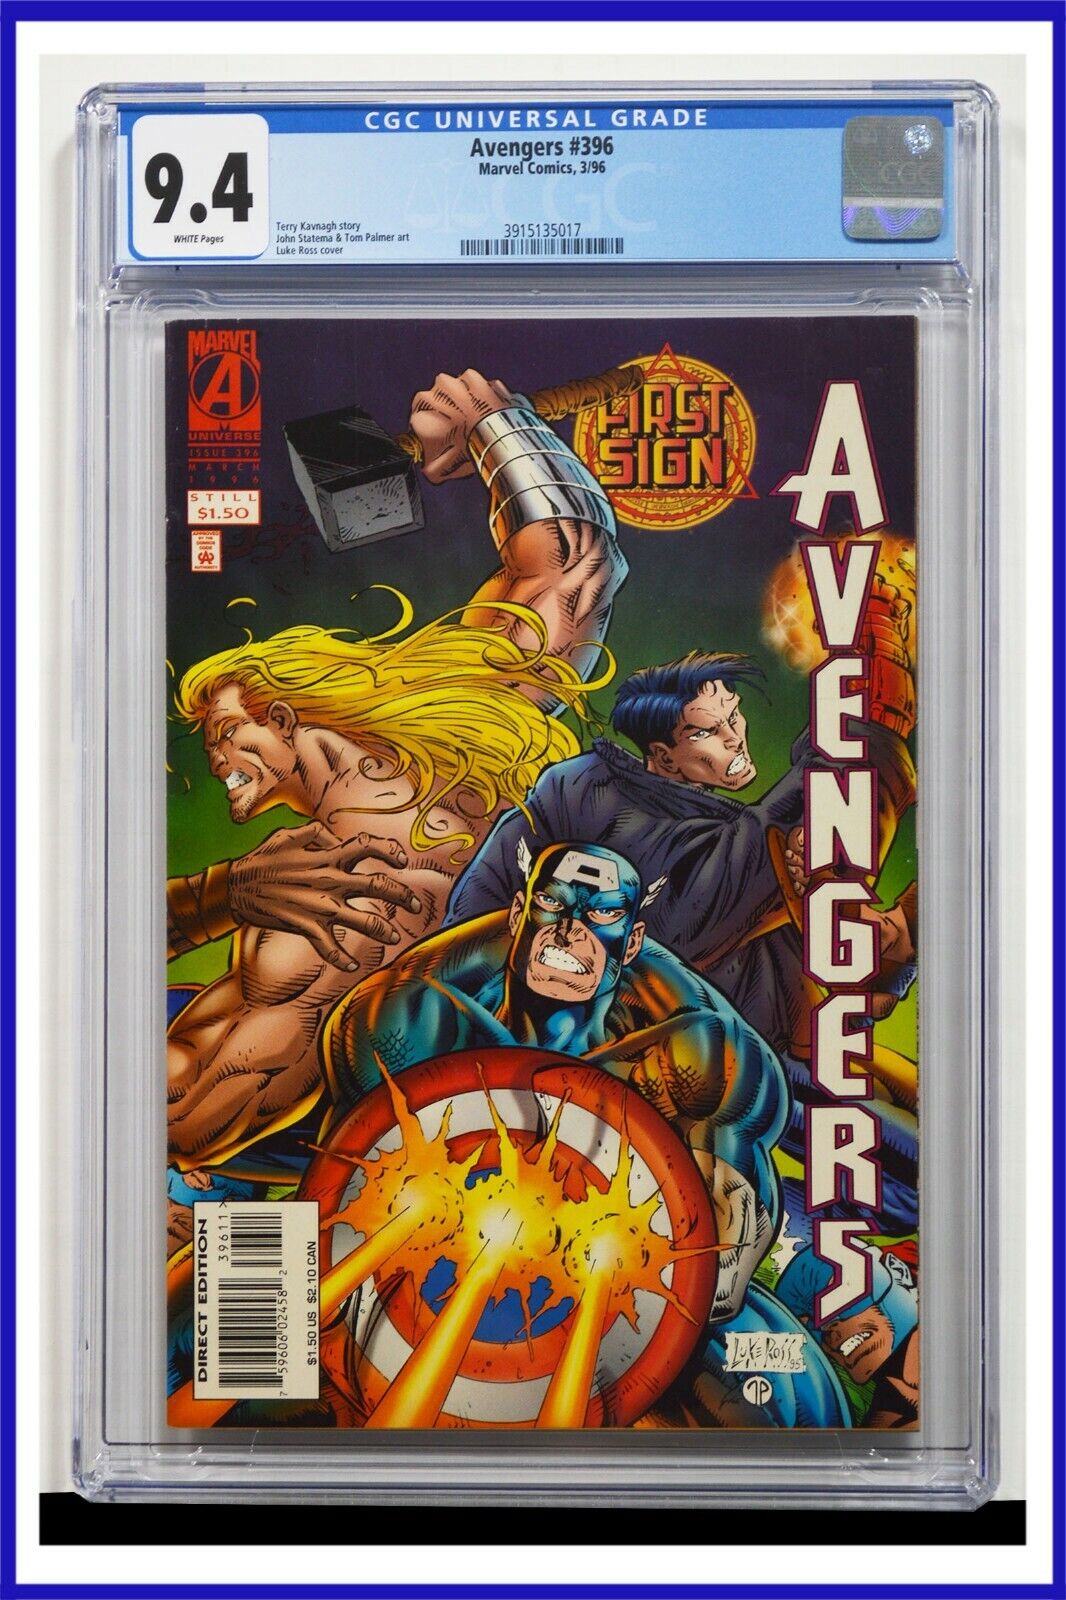 Avengers #396 CGC Graded 9.4 Marvel March 1996 White Pages Comic Book.